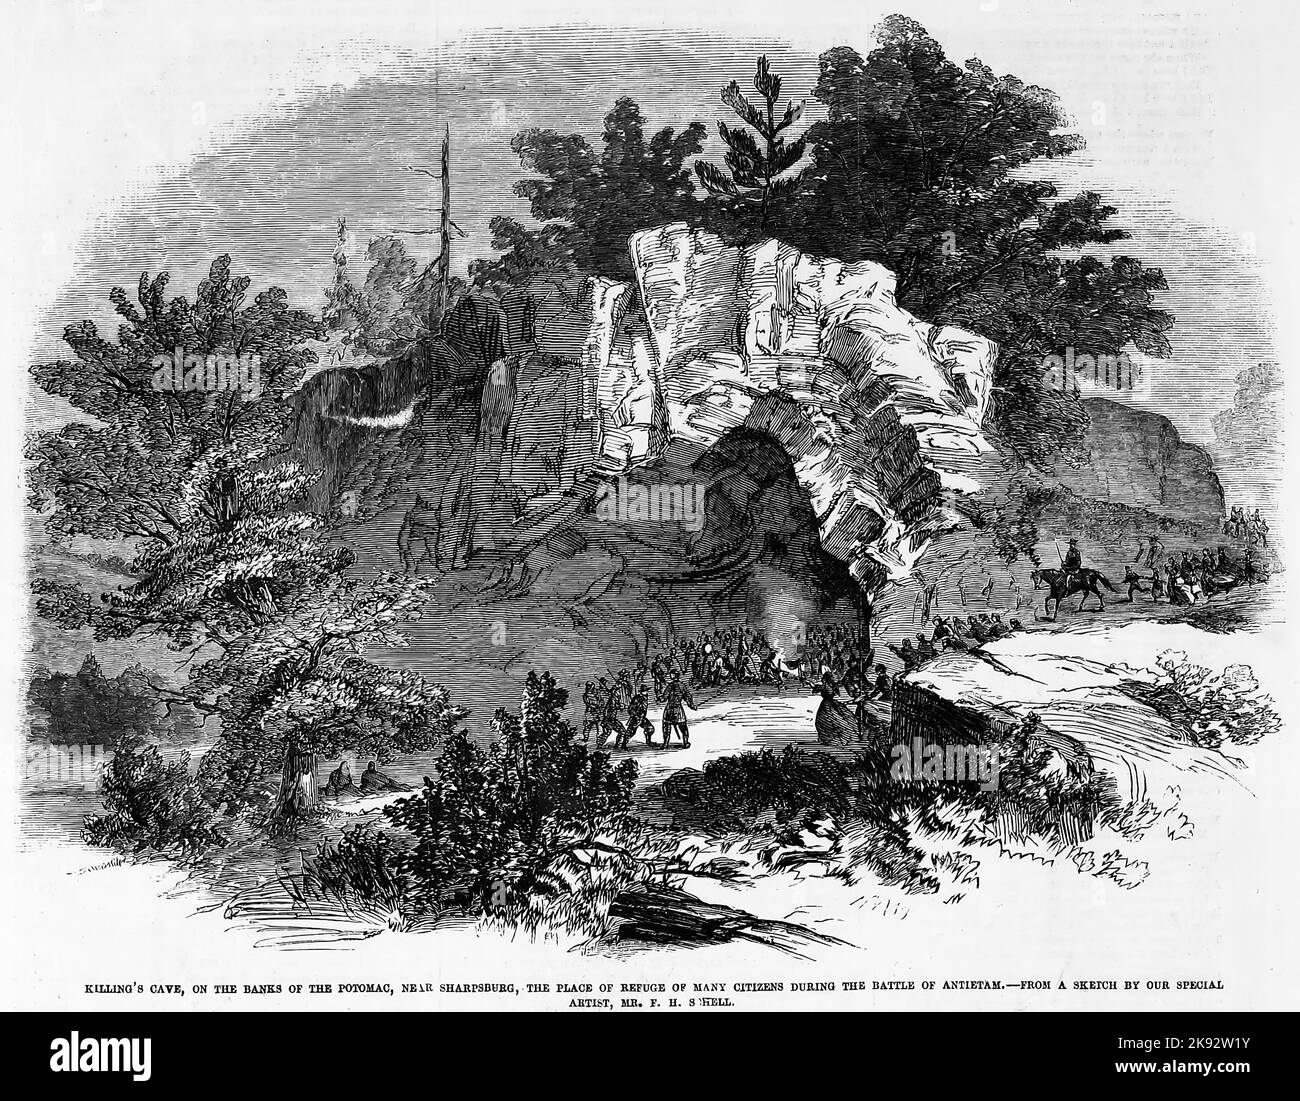 Killiansburg Cave, on the banks of the Potomac, near Sharpsburg, Maryland, the place of refuge of many citizens during the Battle of Antietam. September 1862. 19th century American Civil War illustration from Frank Leslie's Illustrated Newspaper Stock Photo